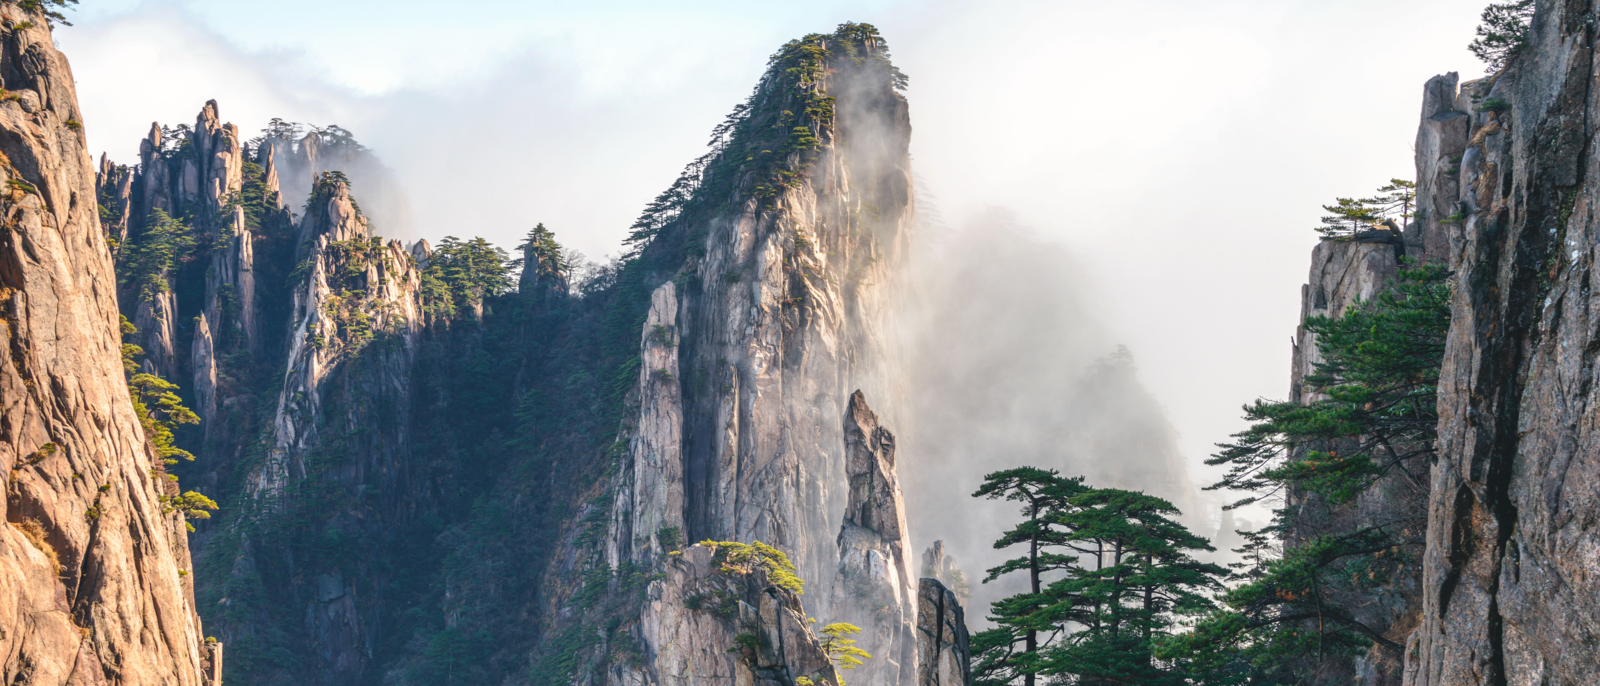 Huangshan mountain scenery in Anhui province, China